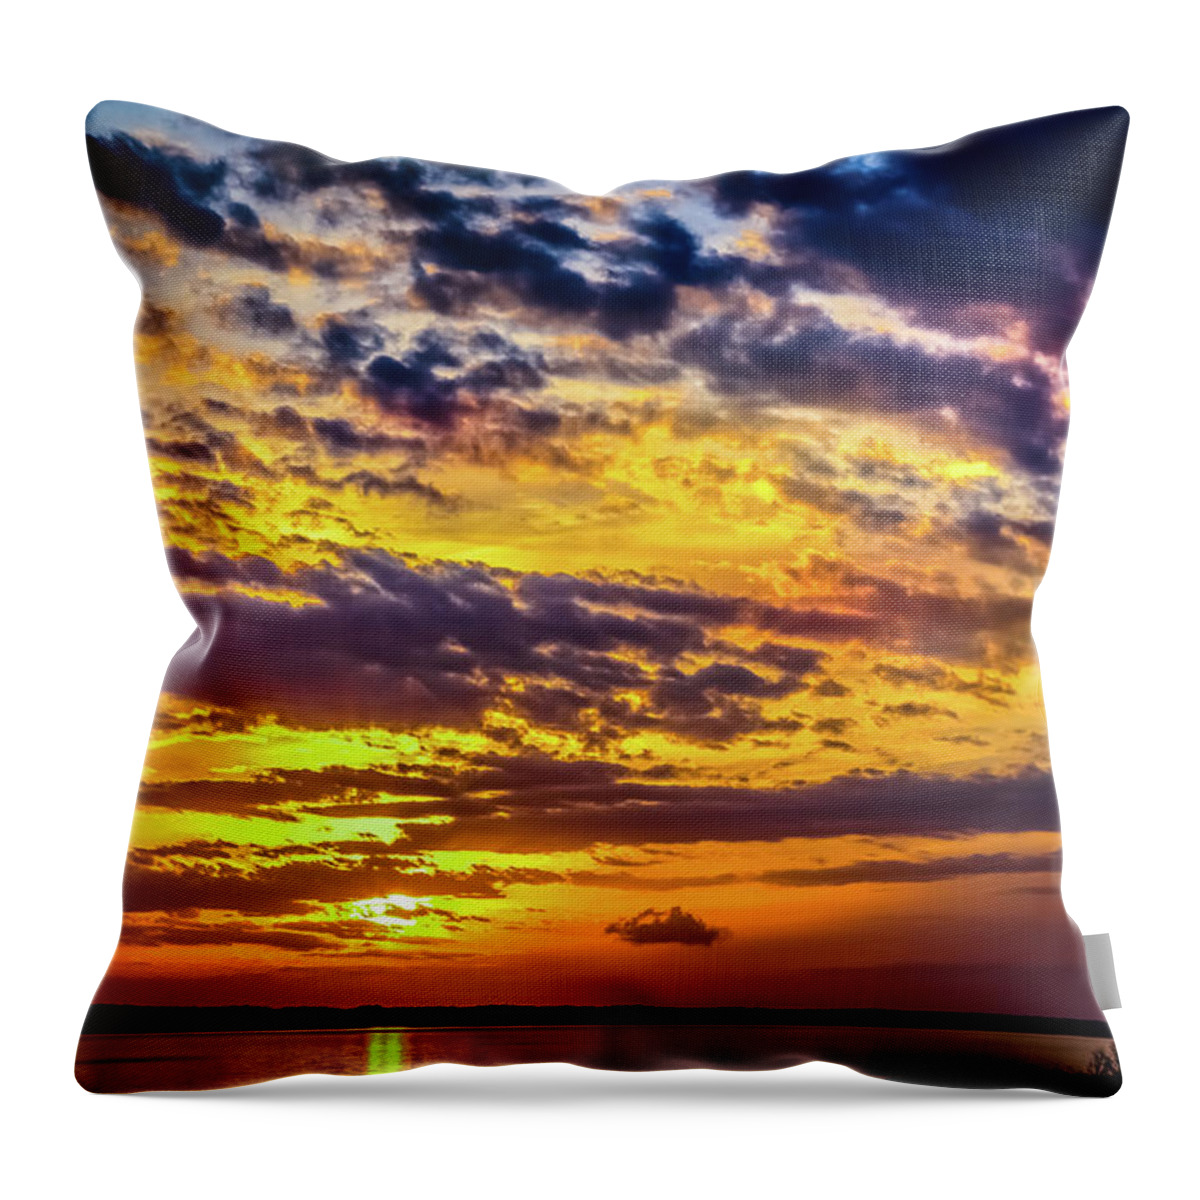 Sunset Throw Pillow featuring the photograph Rainy Day Sunset - 4 by Barry Jones